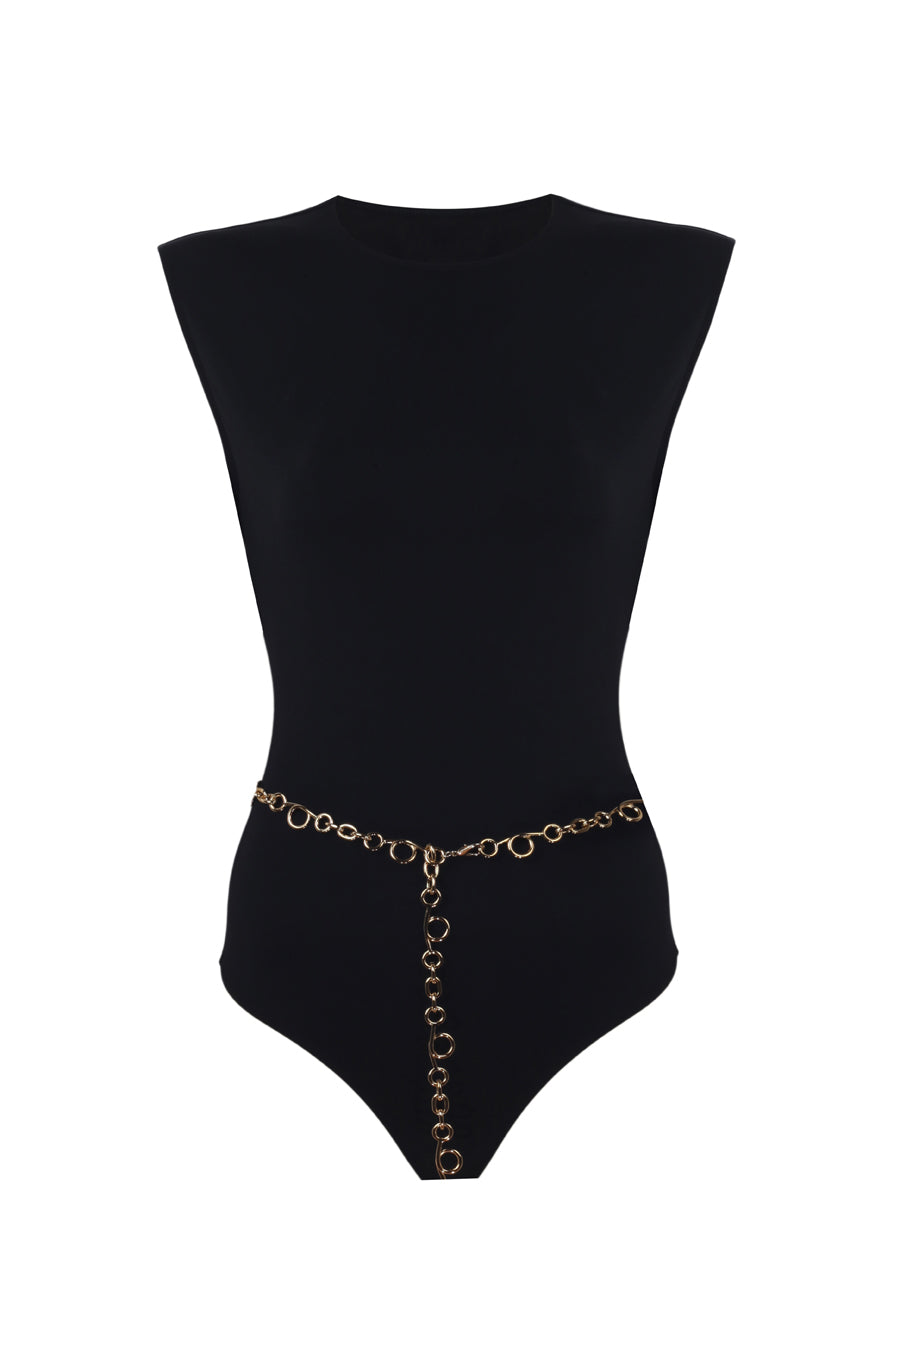 Audrey Black Swimsuit with Chain